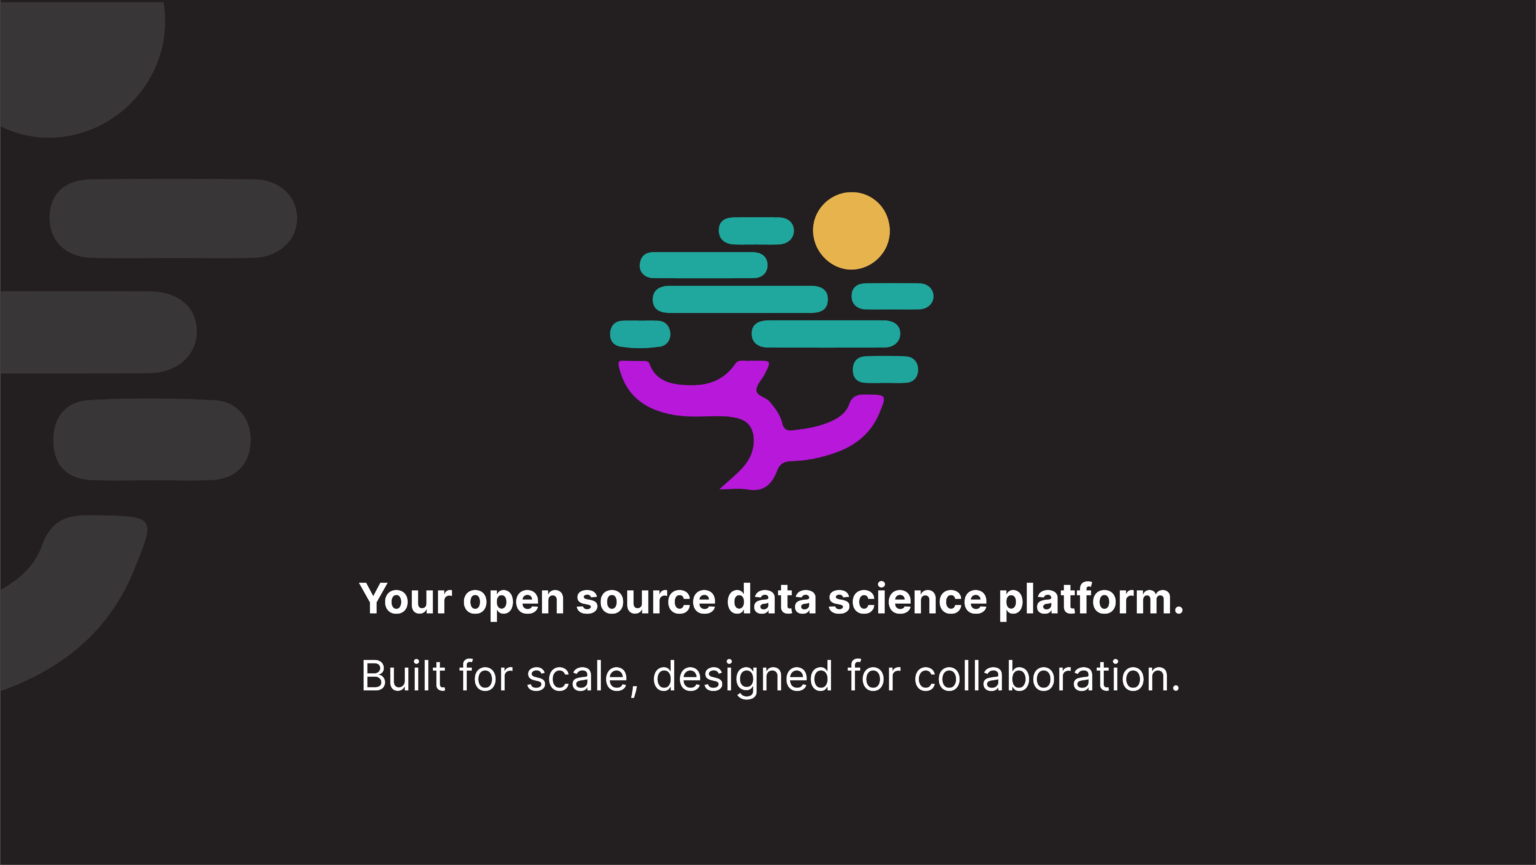 Image of a colorful Nebari logo on a black background, with the text "Your open source data science platform. Built for scale, designed for collaboration."